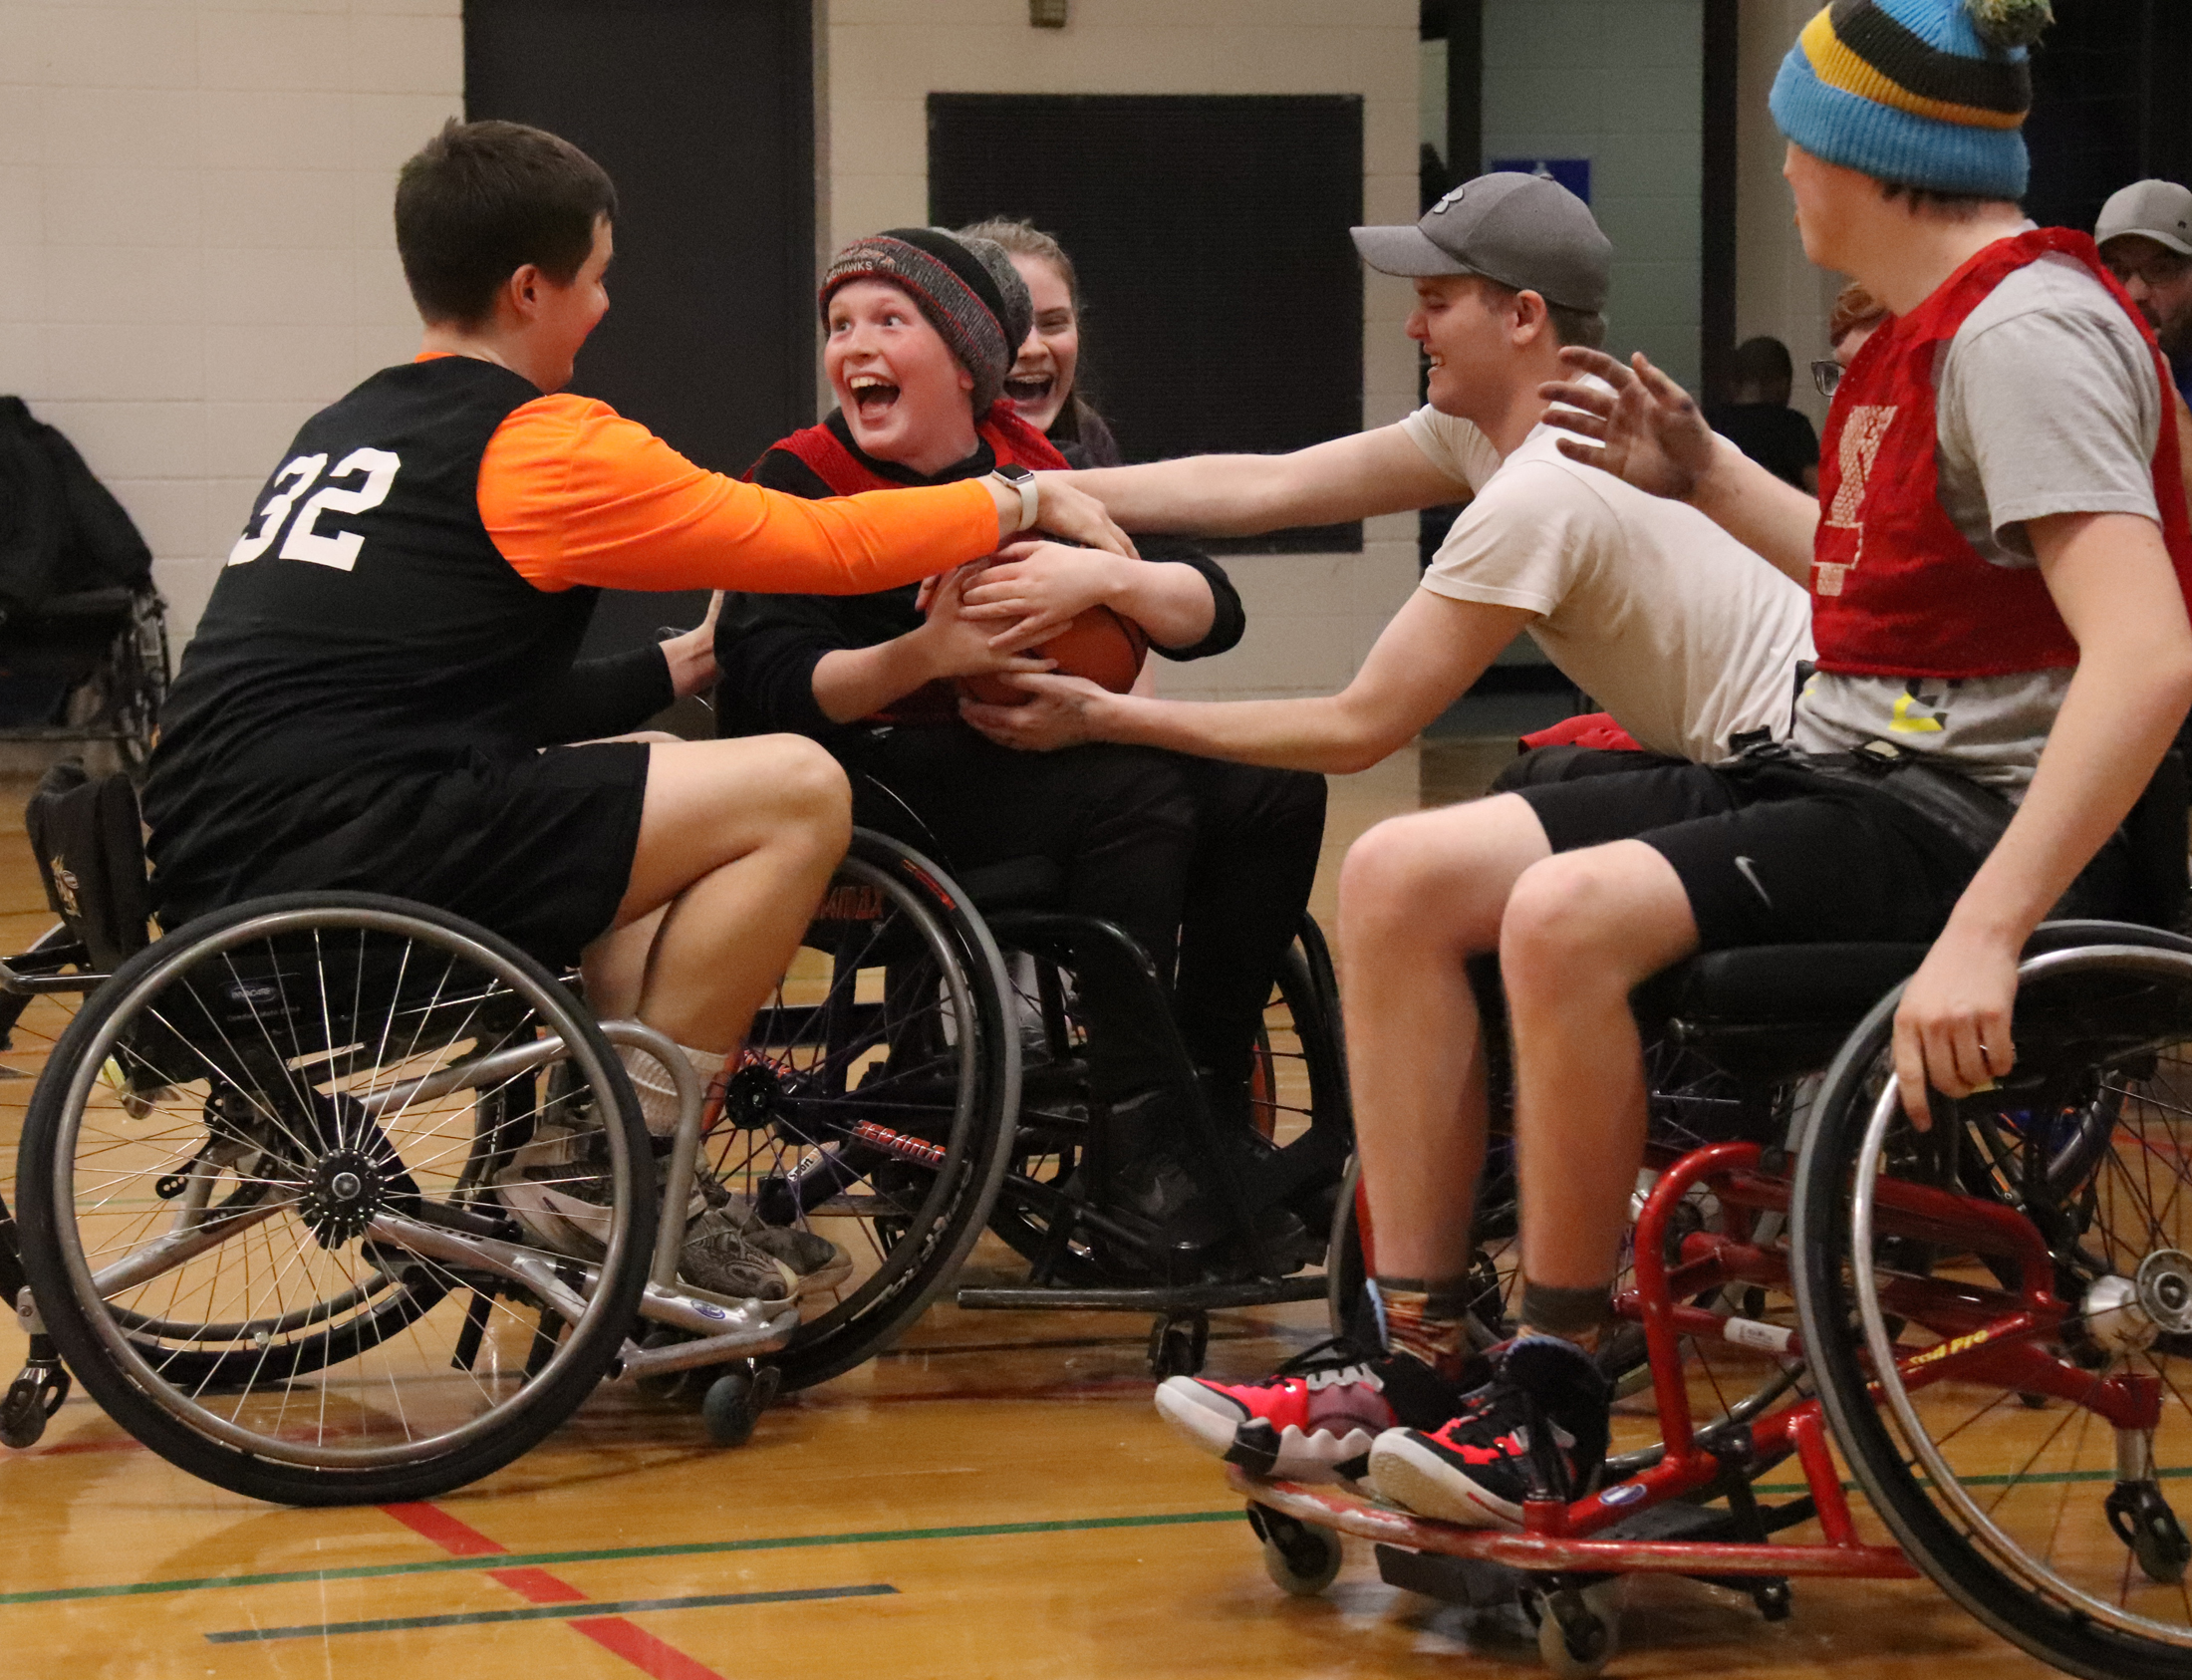 Vertical leap not required to roll with with wheelchair basketball players